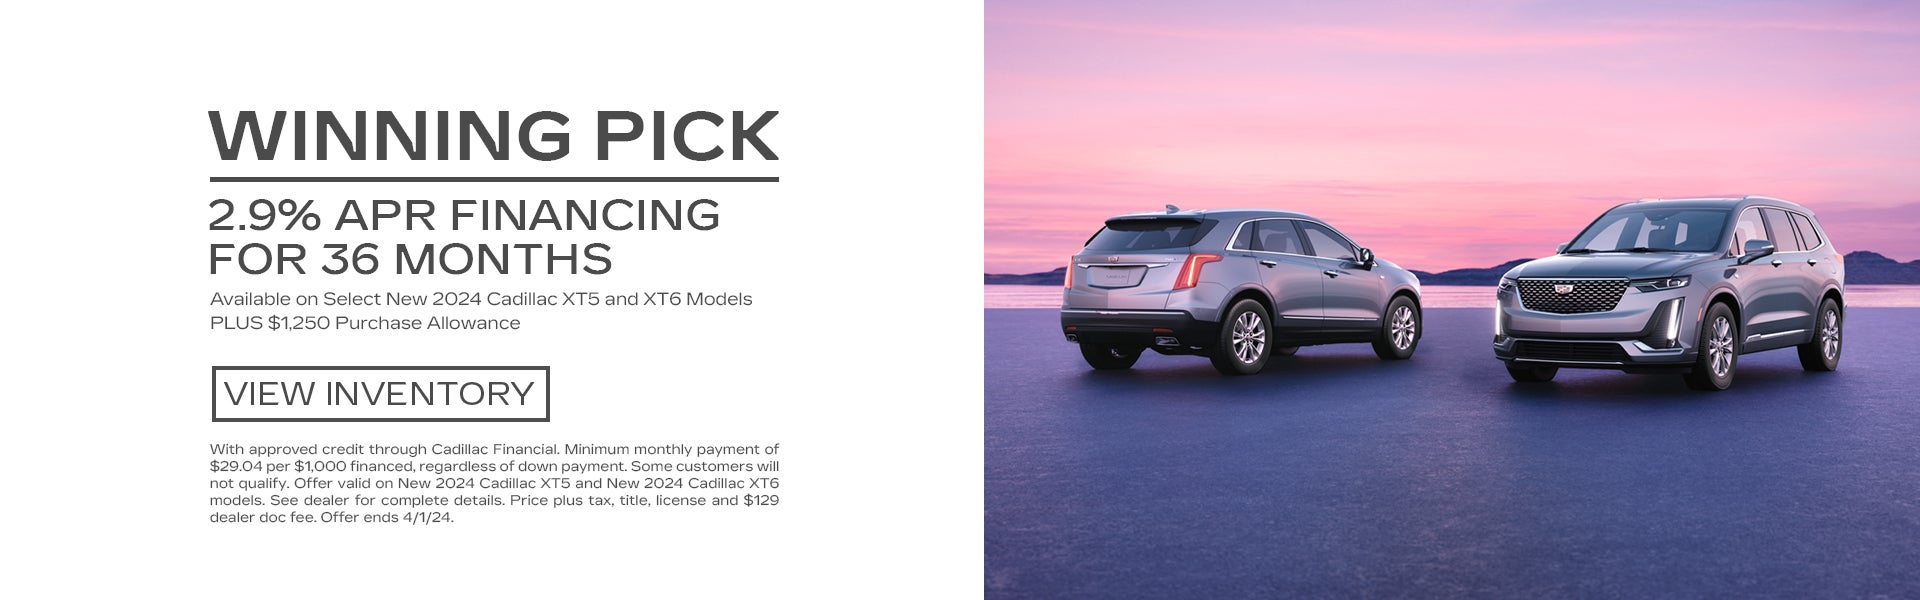 2.9% APR Financing For 36 Months on Select Cadillac Models 